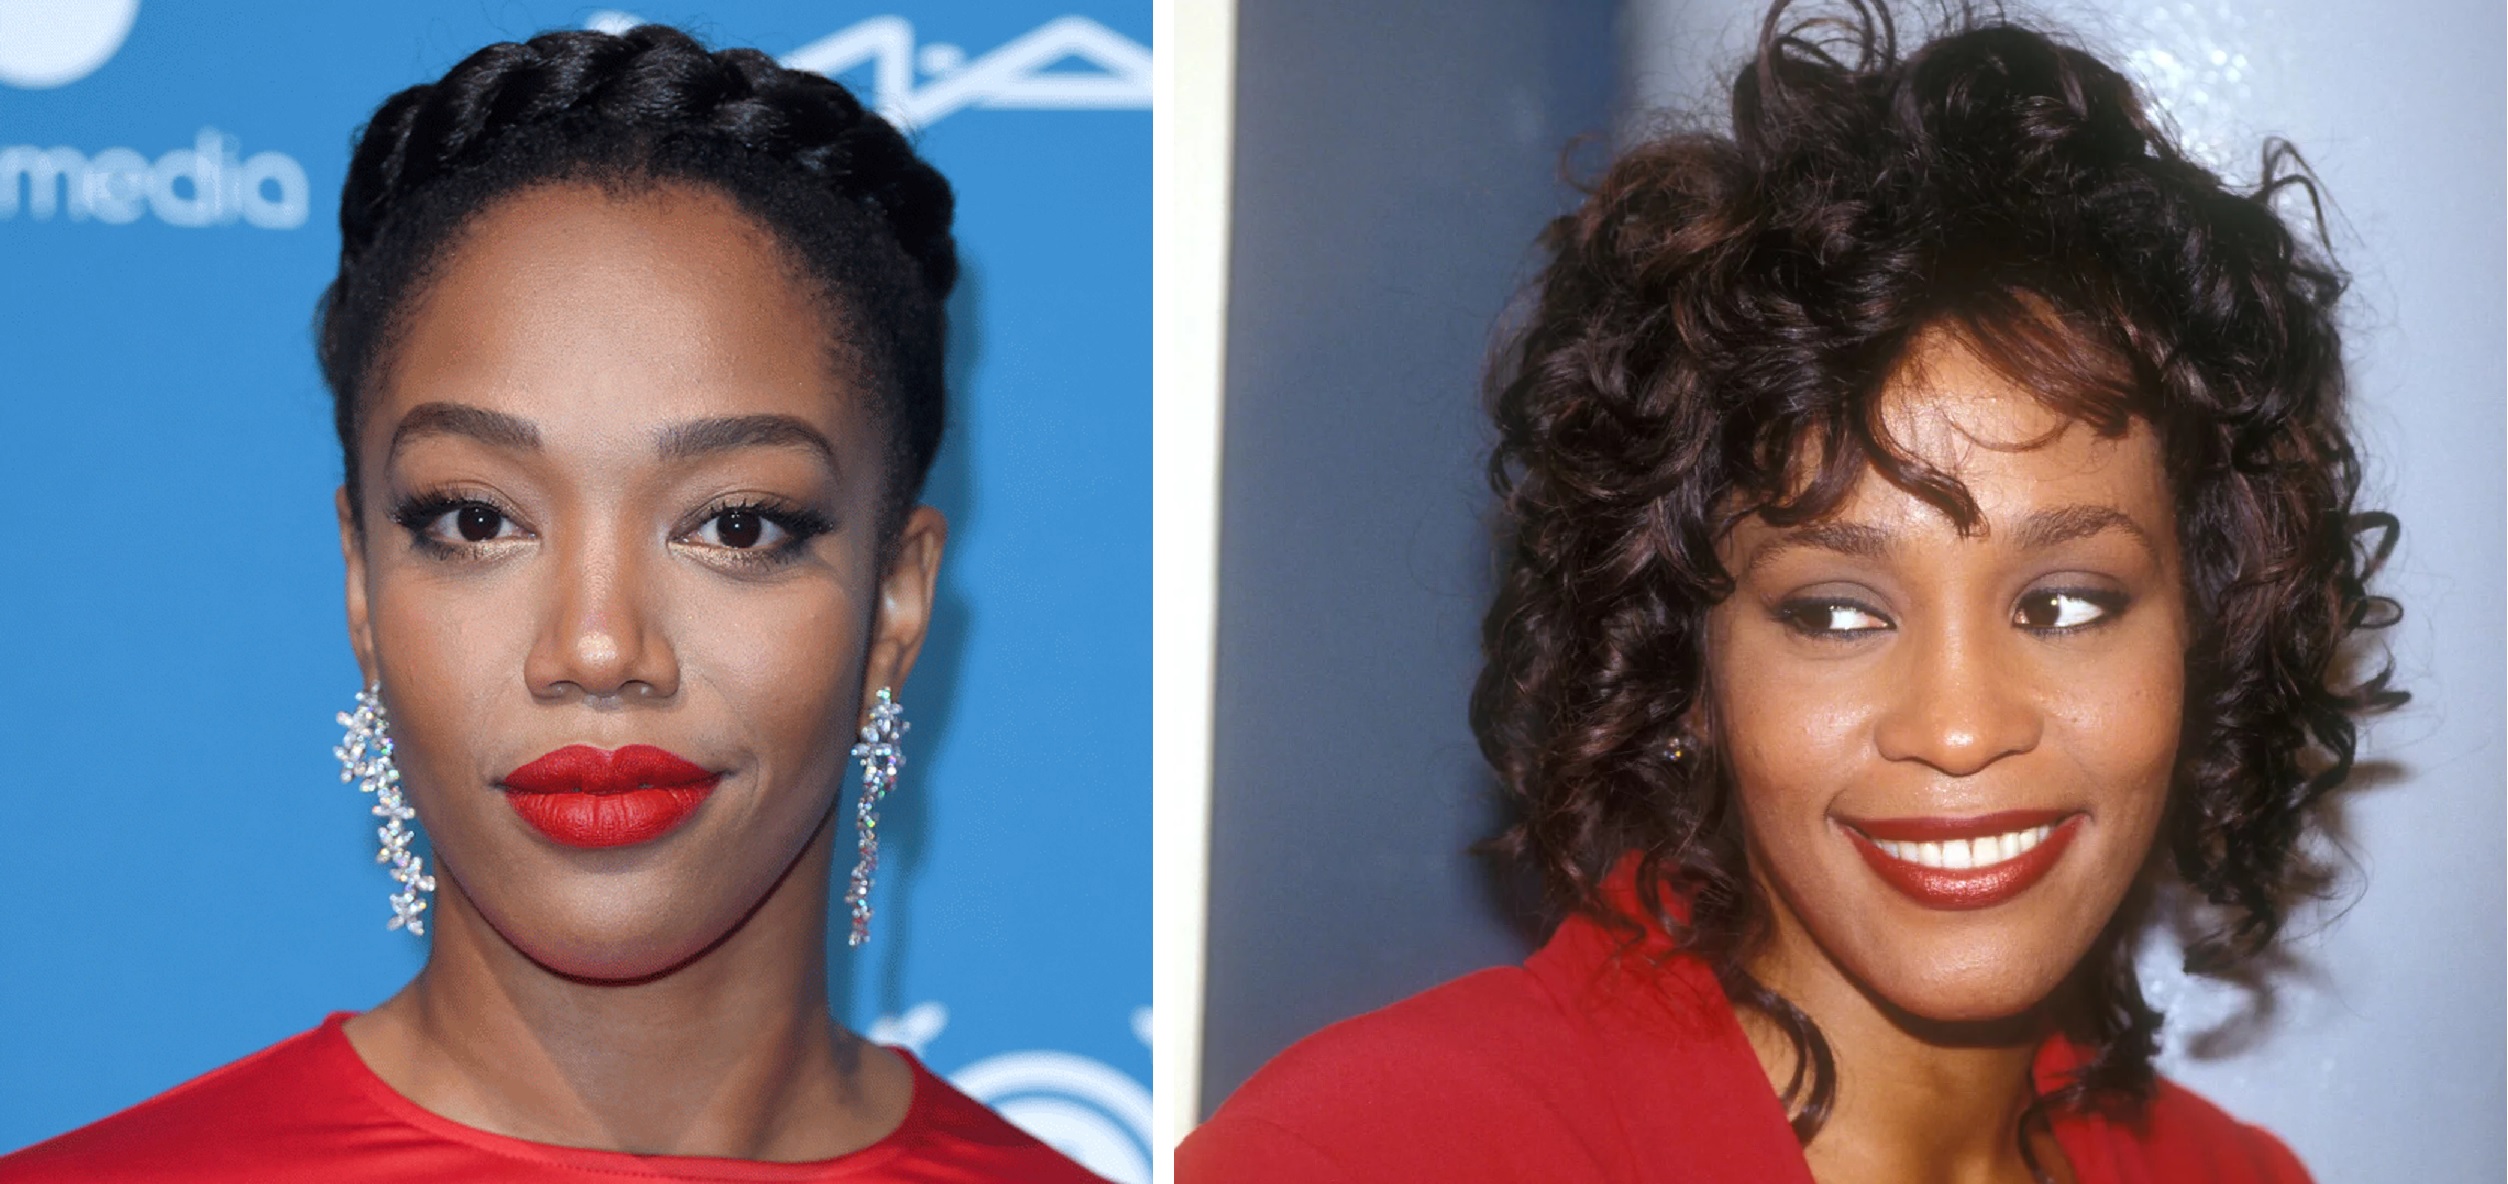 Naomi Ackie To Play Whitney Houston In Official Biopic ‘I Wanna Dance With Somebody’